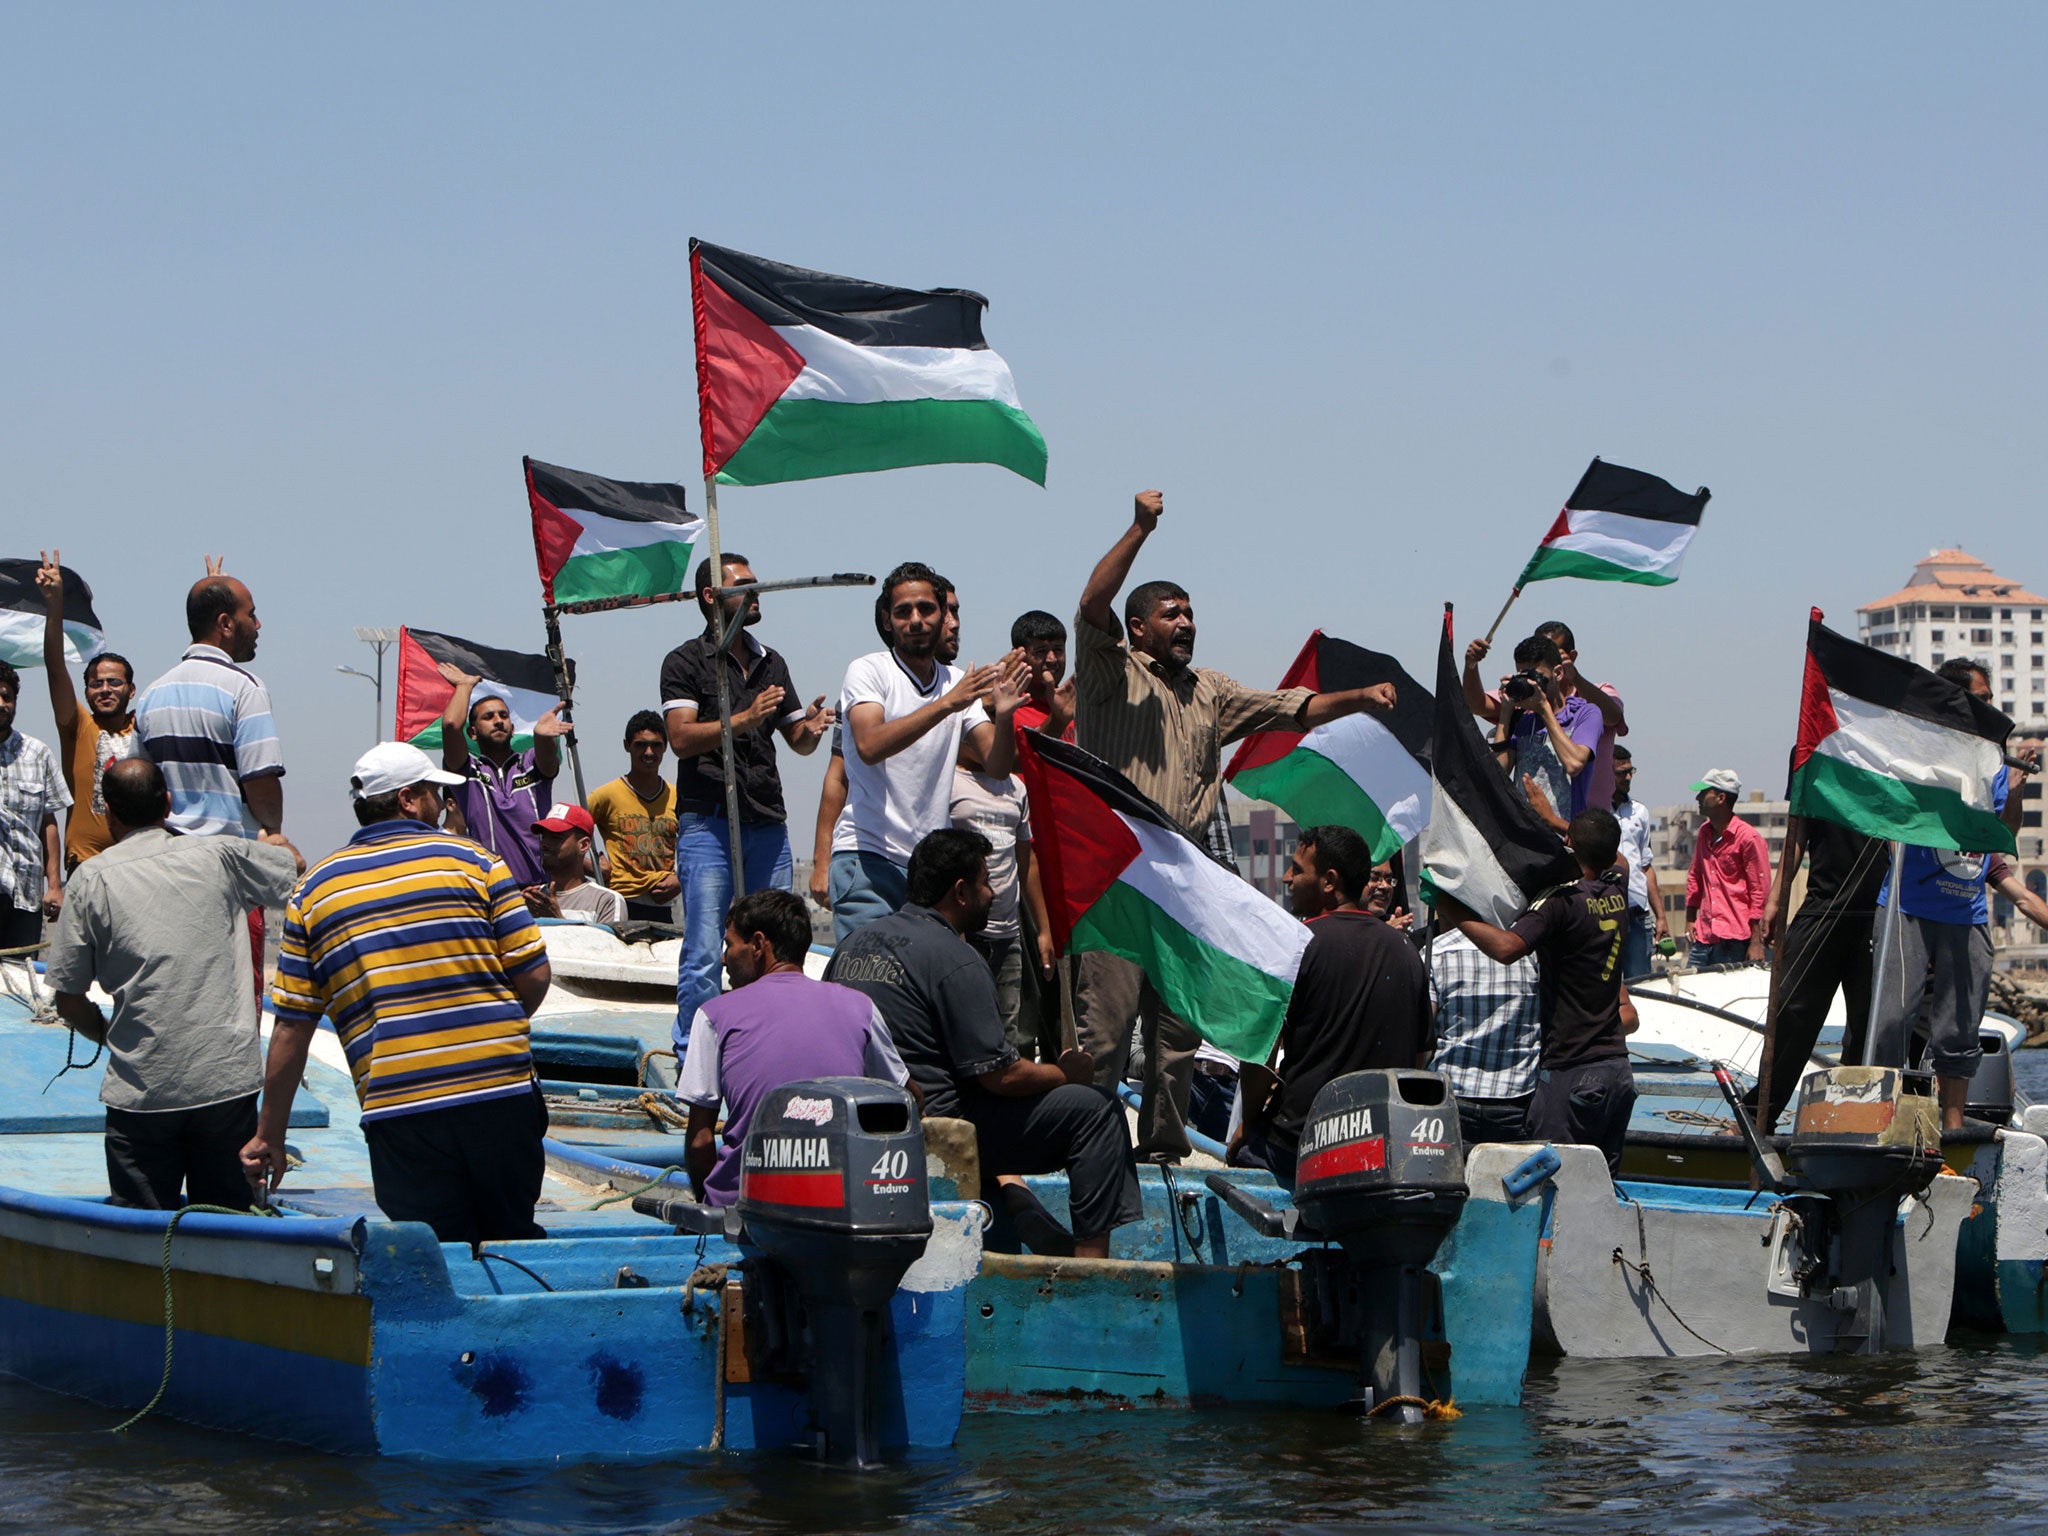 Palestinians rally yesterday in the port of Gaza in support of a flotilla that aims to break the blockade